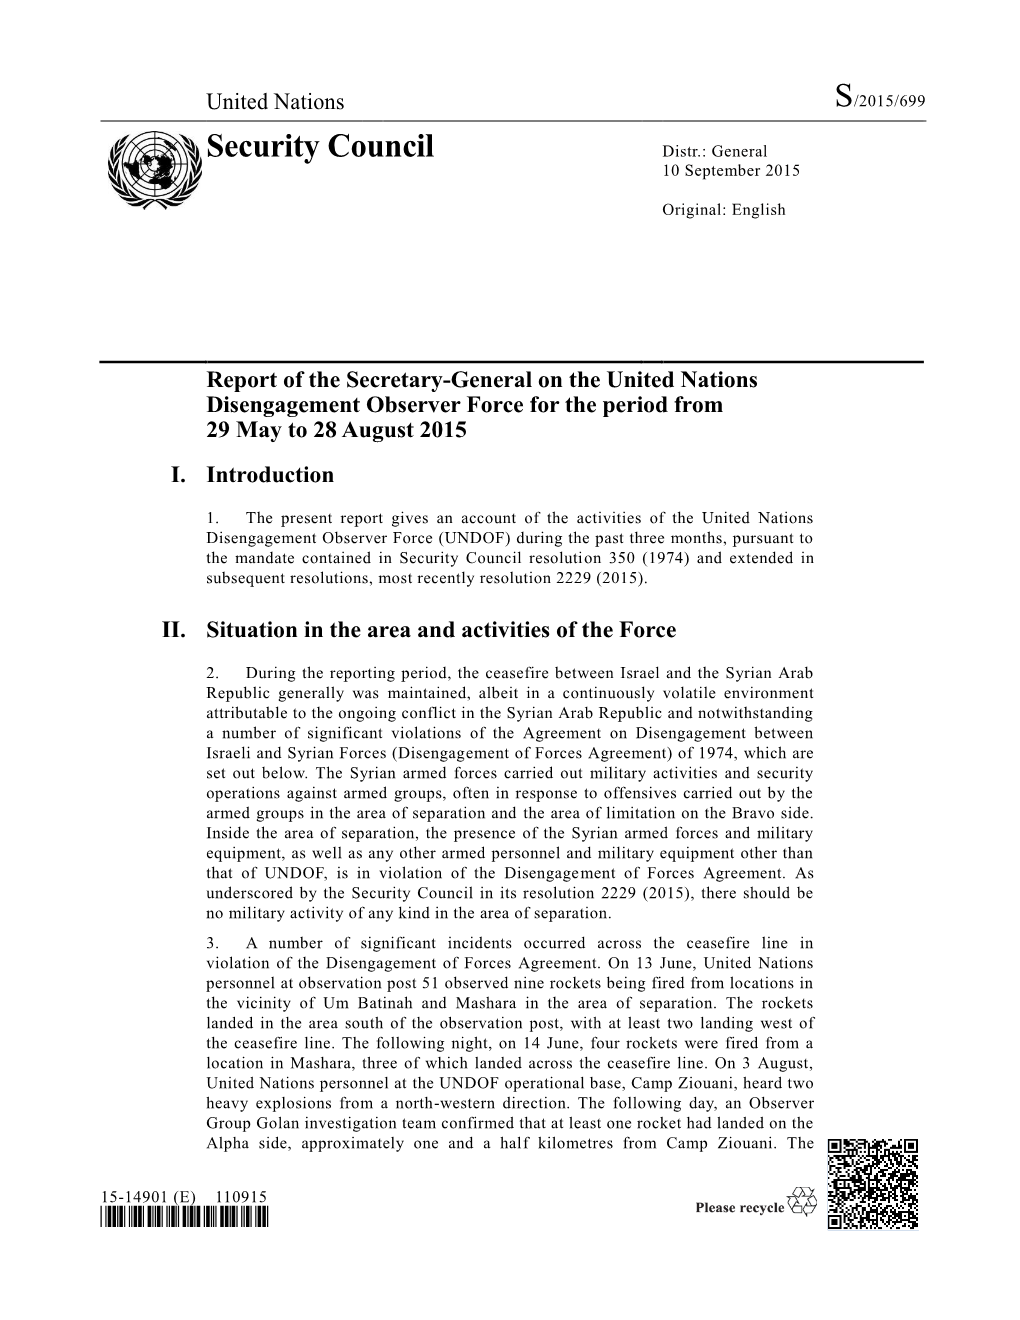 Report of the Secretary-General on the United Nations Disengagement Observer Force for the Period from 29 May to 28 August 2015